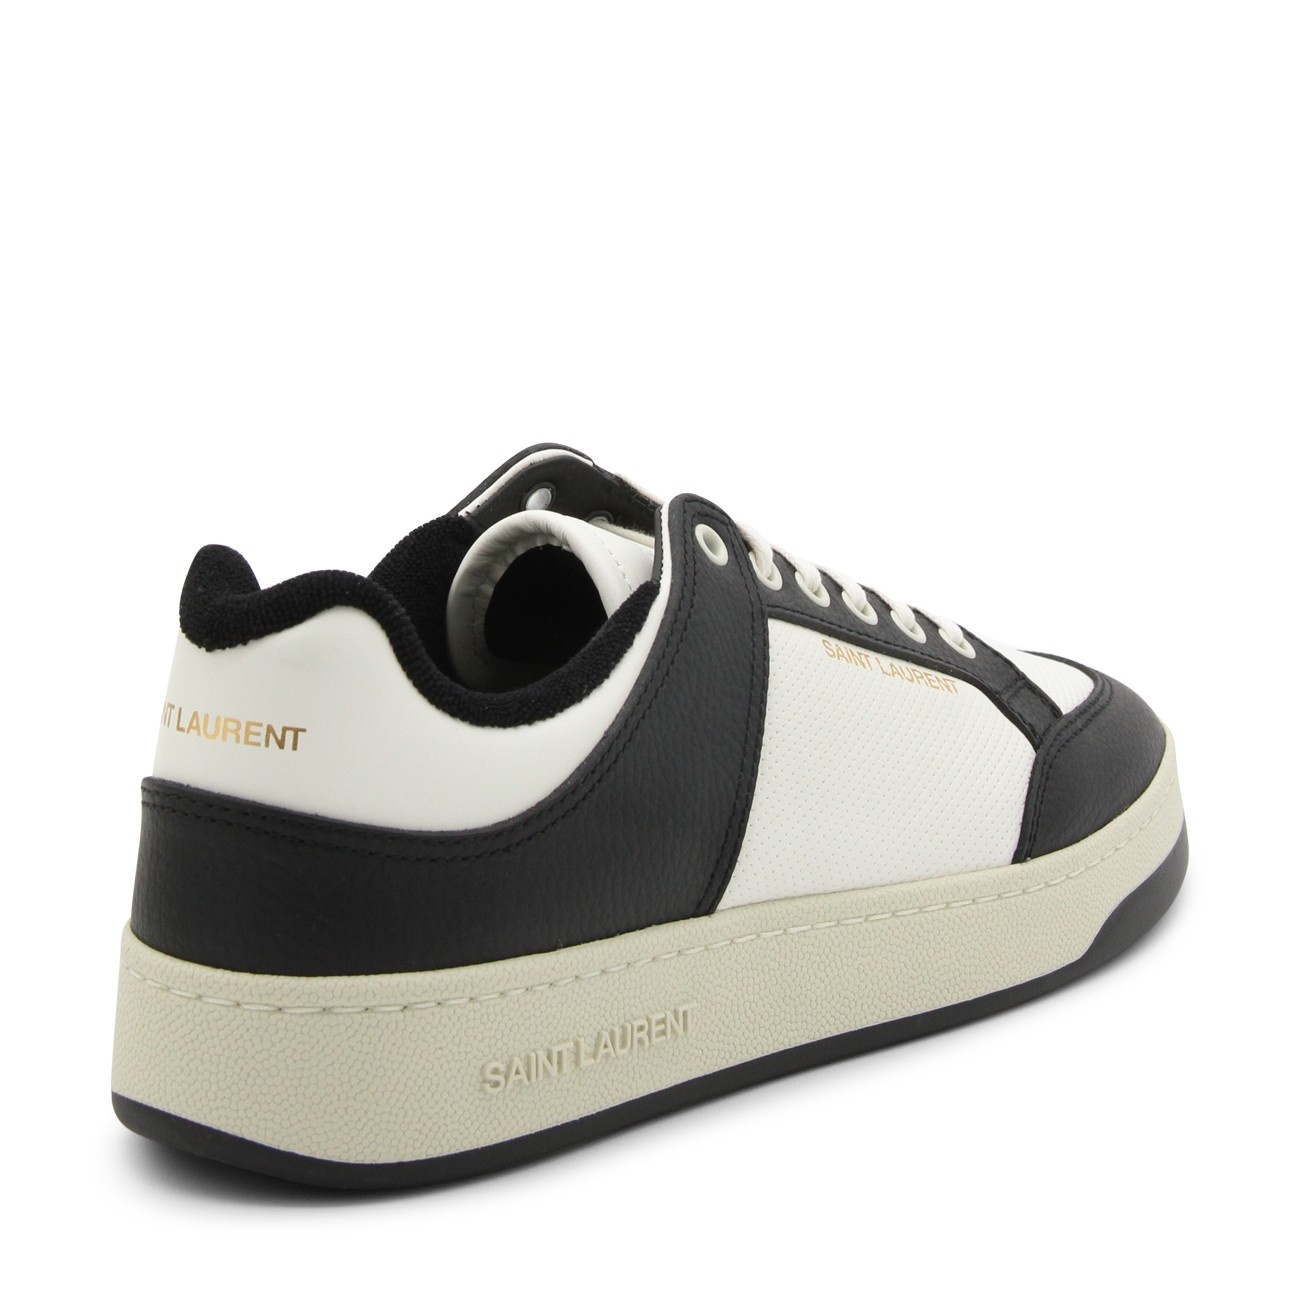 black and white leather sneakers - 3